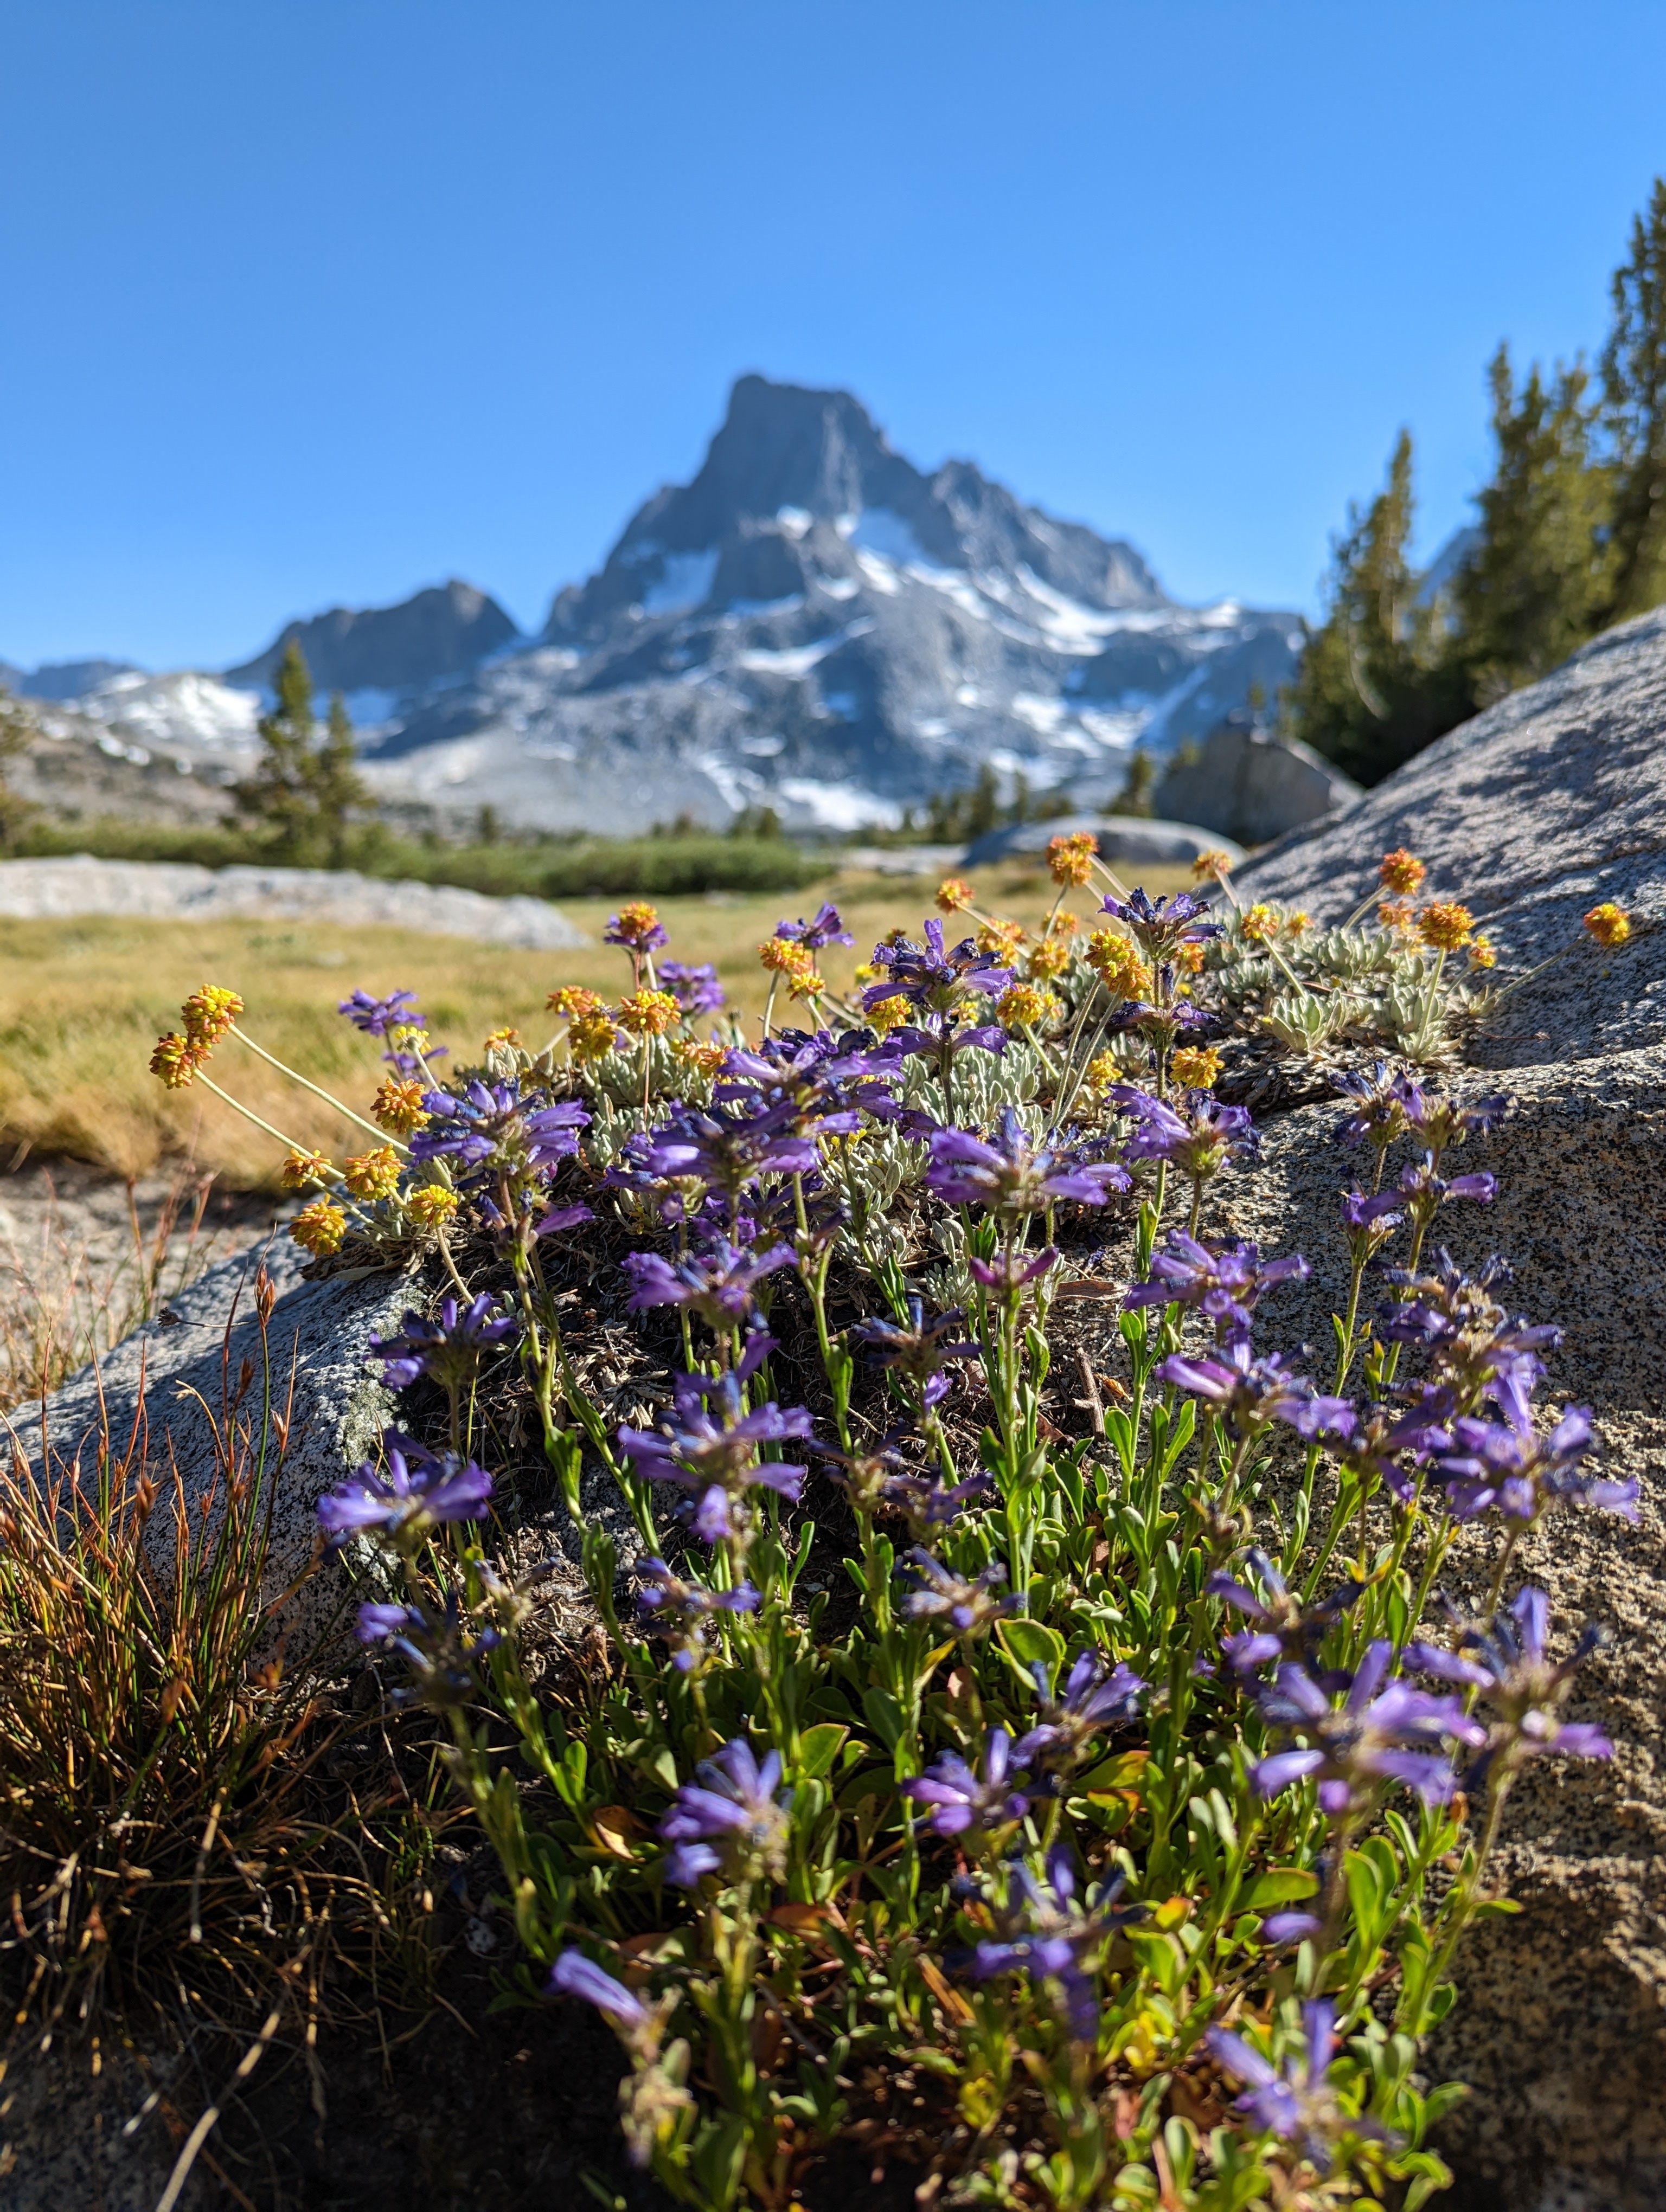 Banner Peak with flowers in foreground